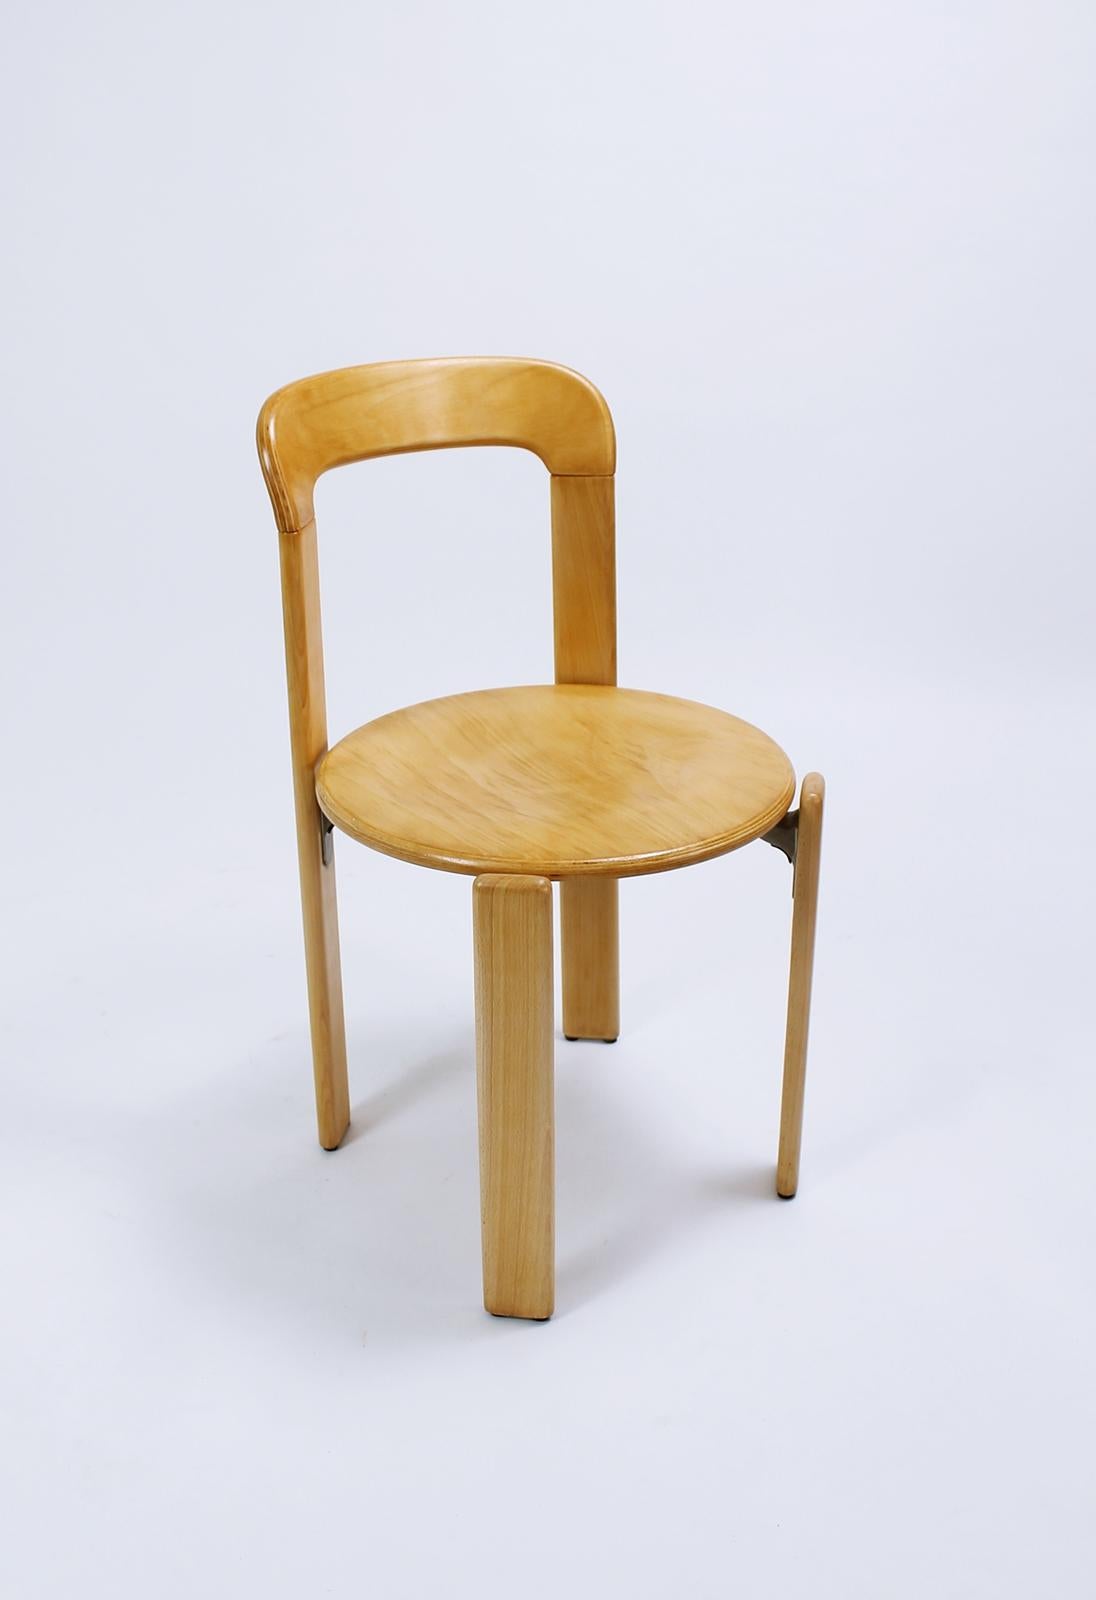 Vintage Industrial 1970s iconic stacking chairs designed by Bruno Rey for Dietiker 

Not just incredibly sturdy chairs but they make some fabulous shapes too.

In good vintage condition. Have some minor marks commensurate with age and use. Have been